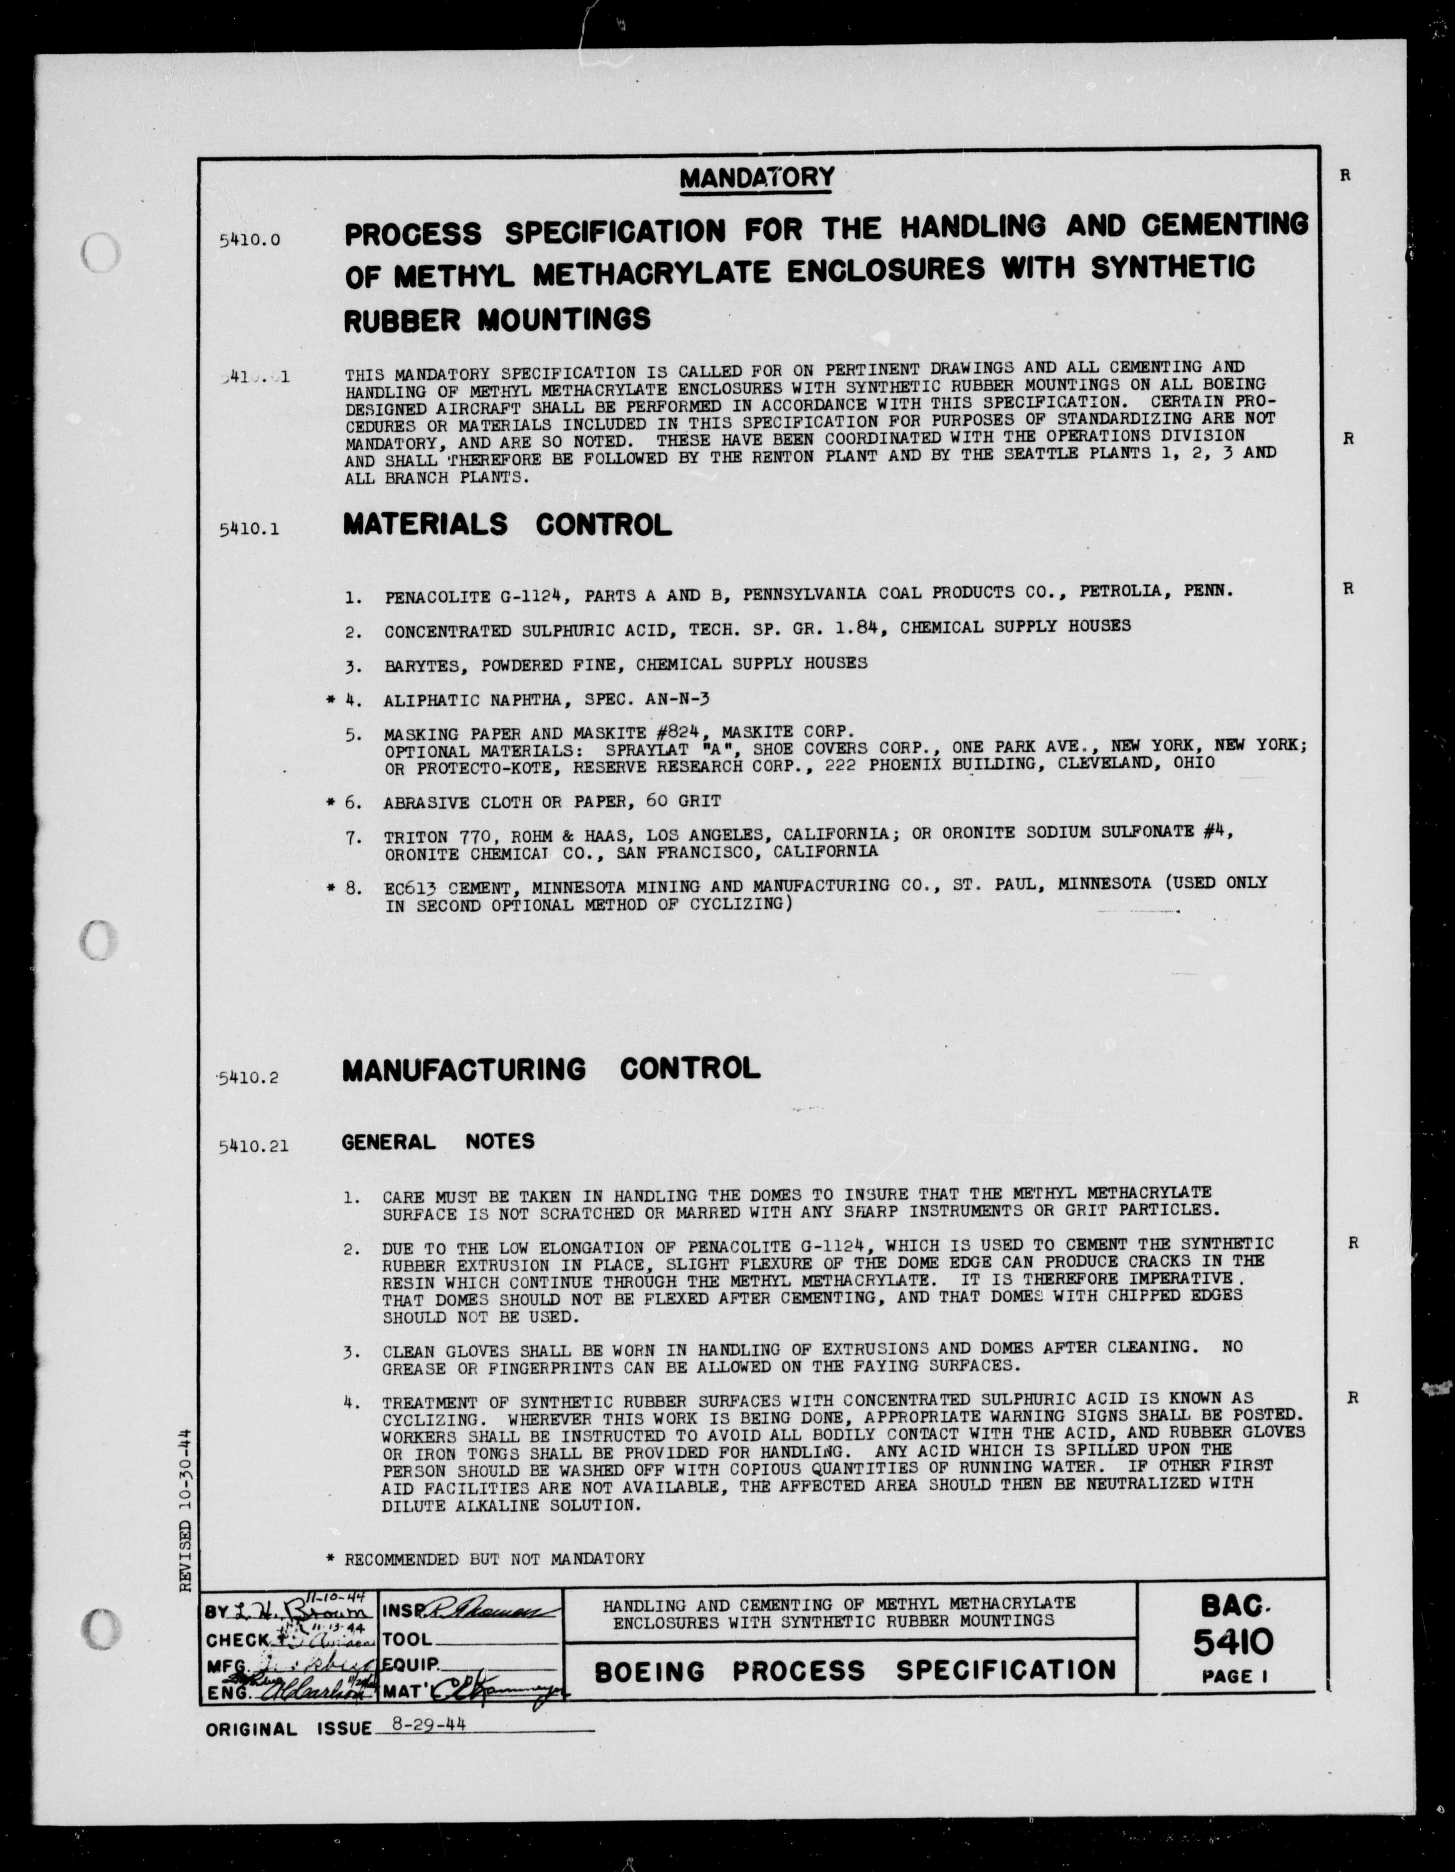 Sample page 1 from AirCorps Library document: Handling and Cementing of Methyl Methacrylate Enclosures with Synthetic Rubber Mountings